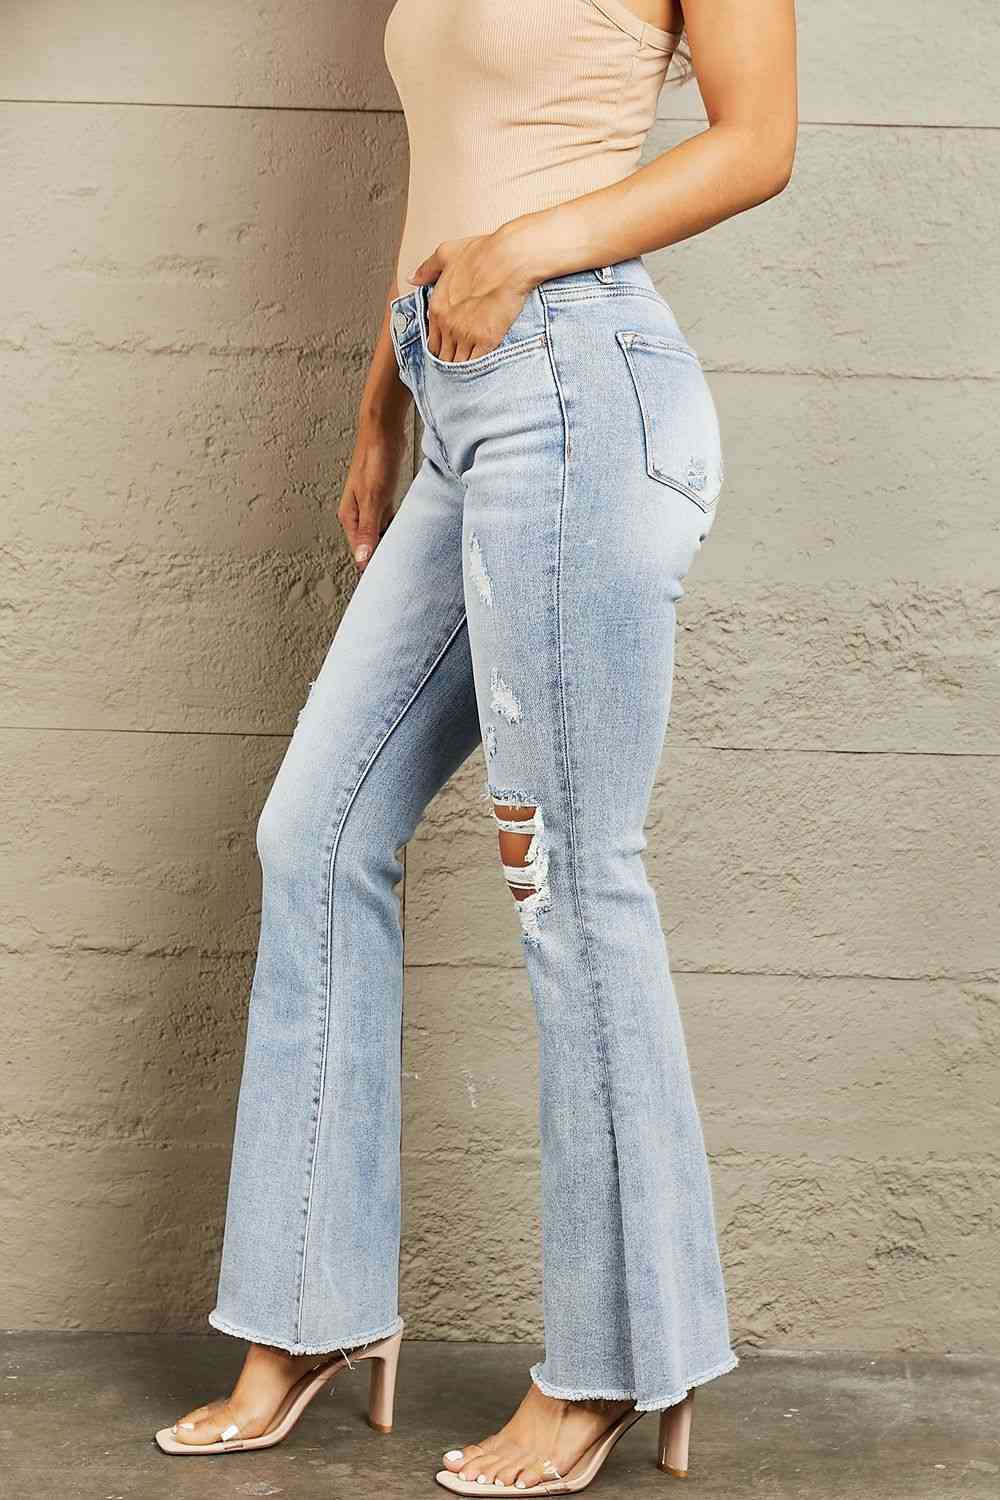 These jeans feature expert distressing that adds a worn-in appeal, giving you a perfectly lived-in look. The flattering mid-rise waist offers a comfortable fit, while the flared leg adds a trendy, retro vibe to any outfit. 